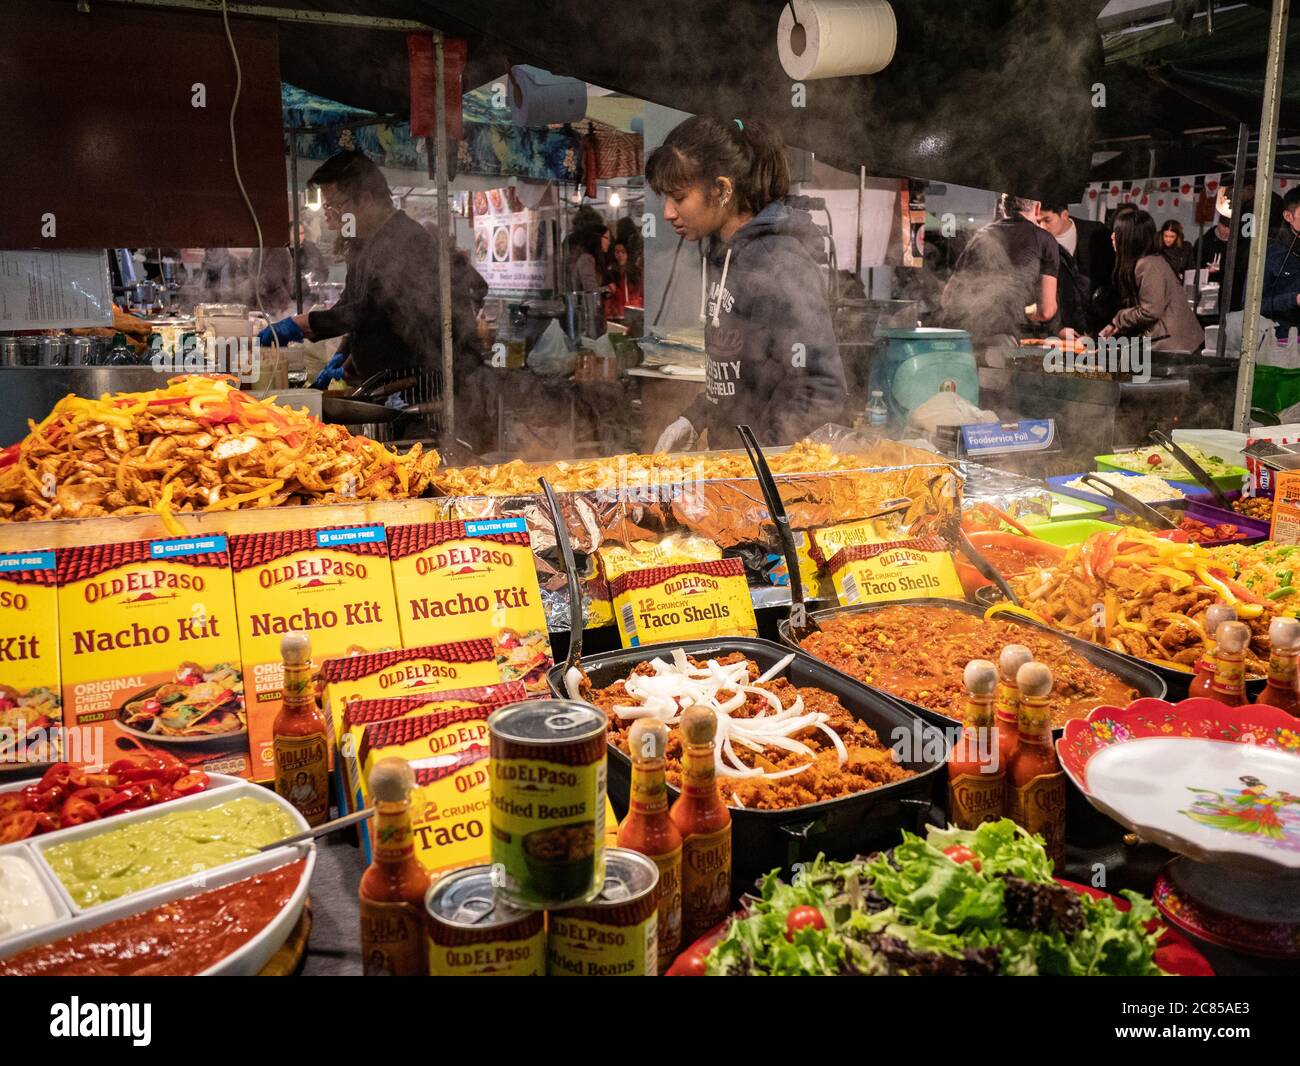 London, UK - November 04 2018: A lady works hard on a Mexican food stall at Brick Lane market in London Stock Photo